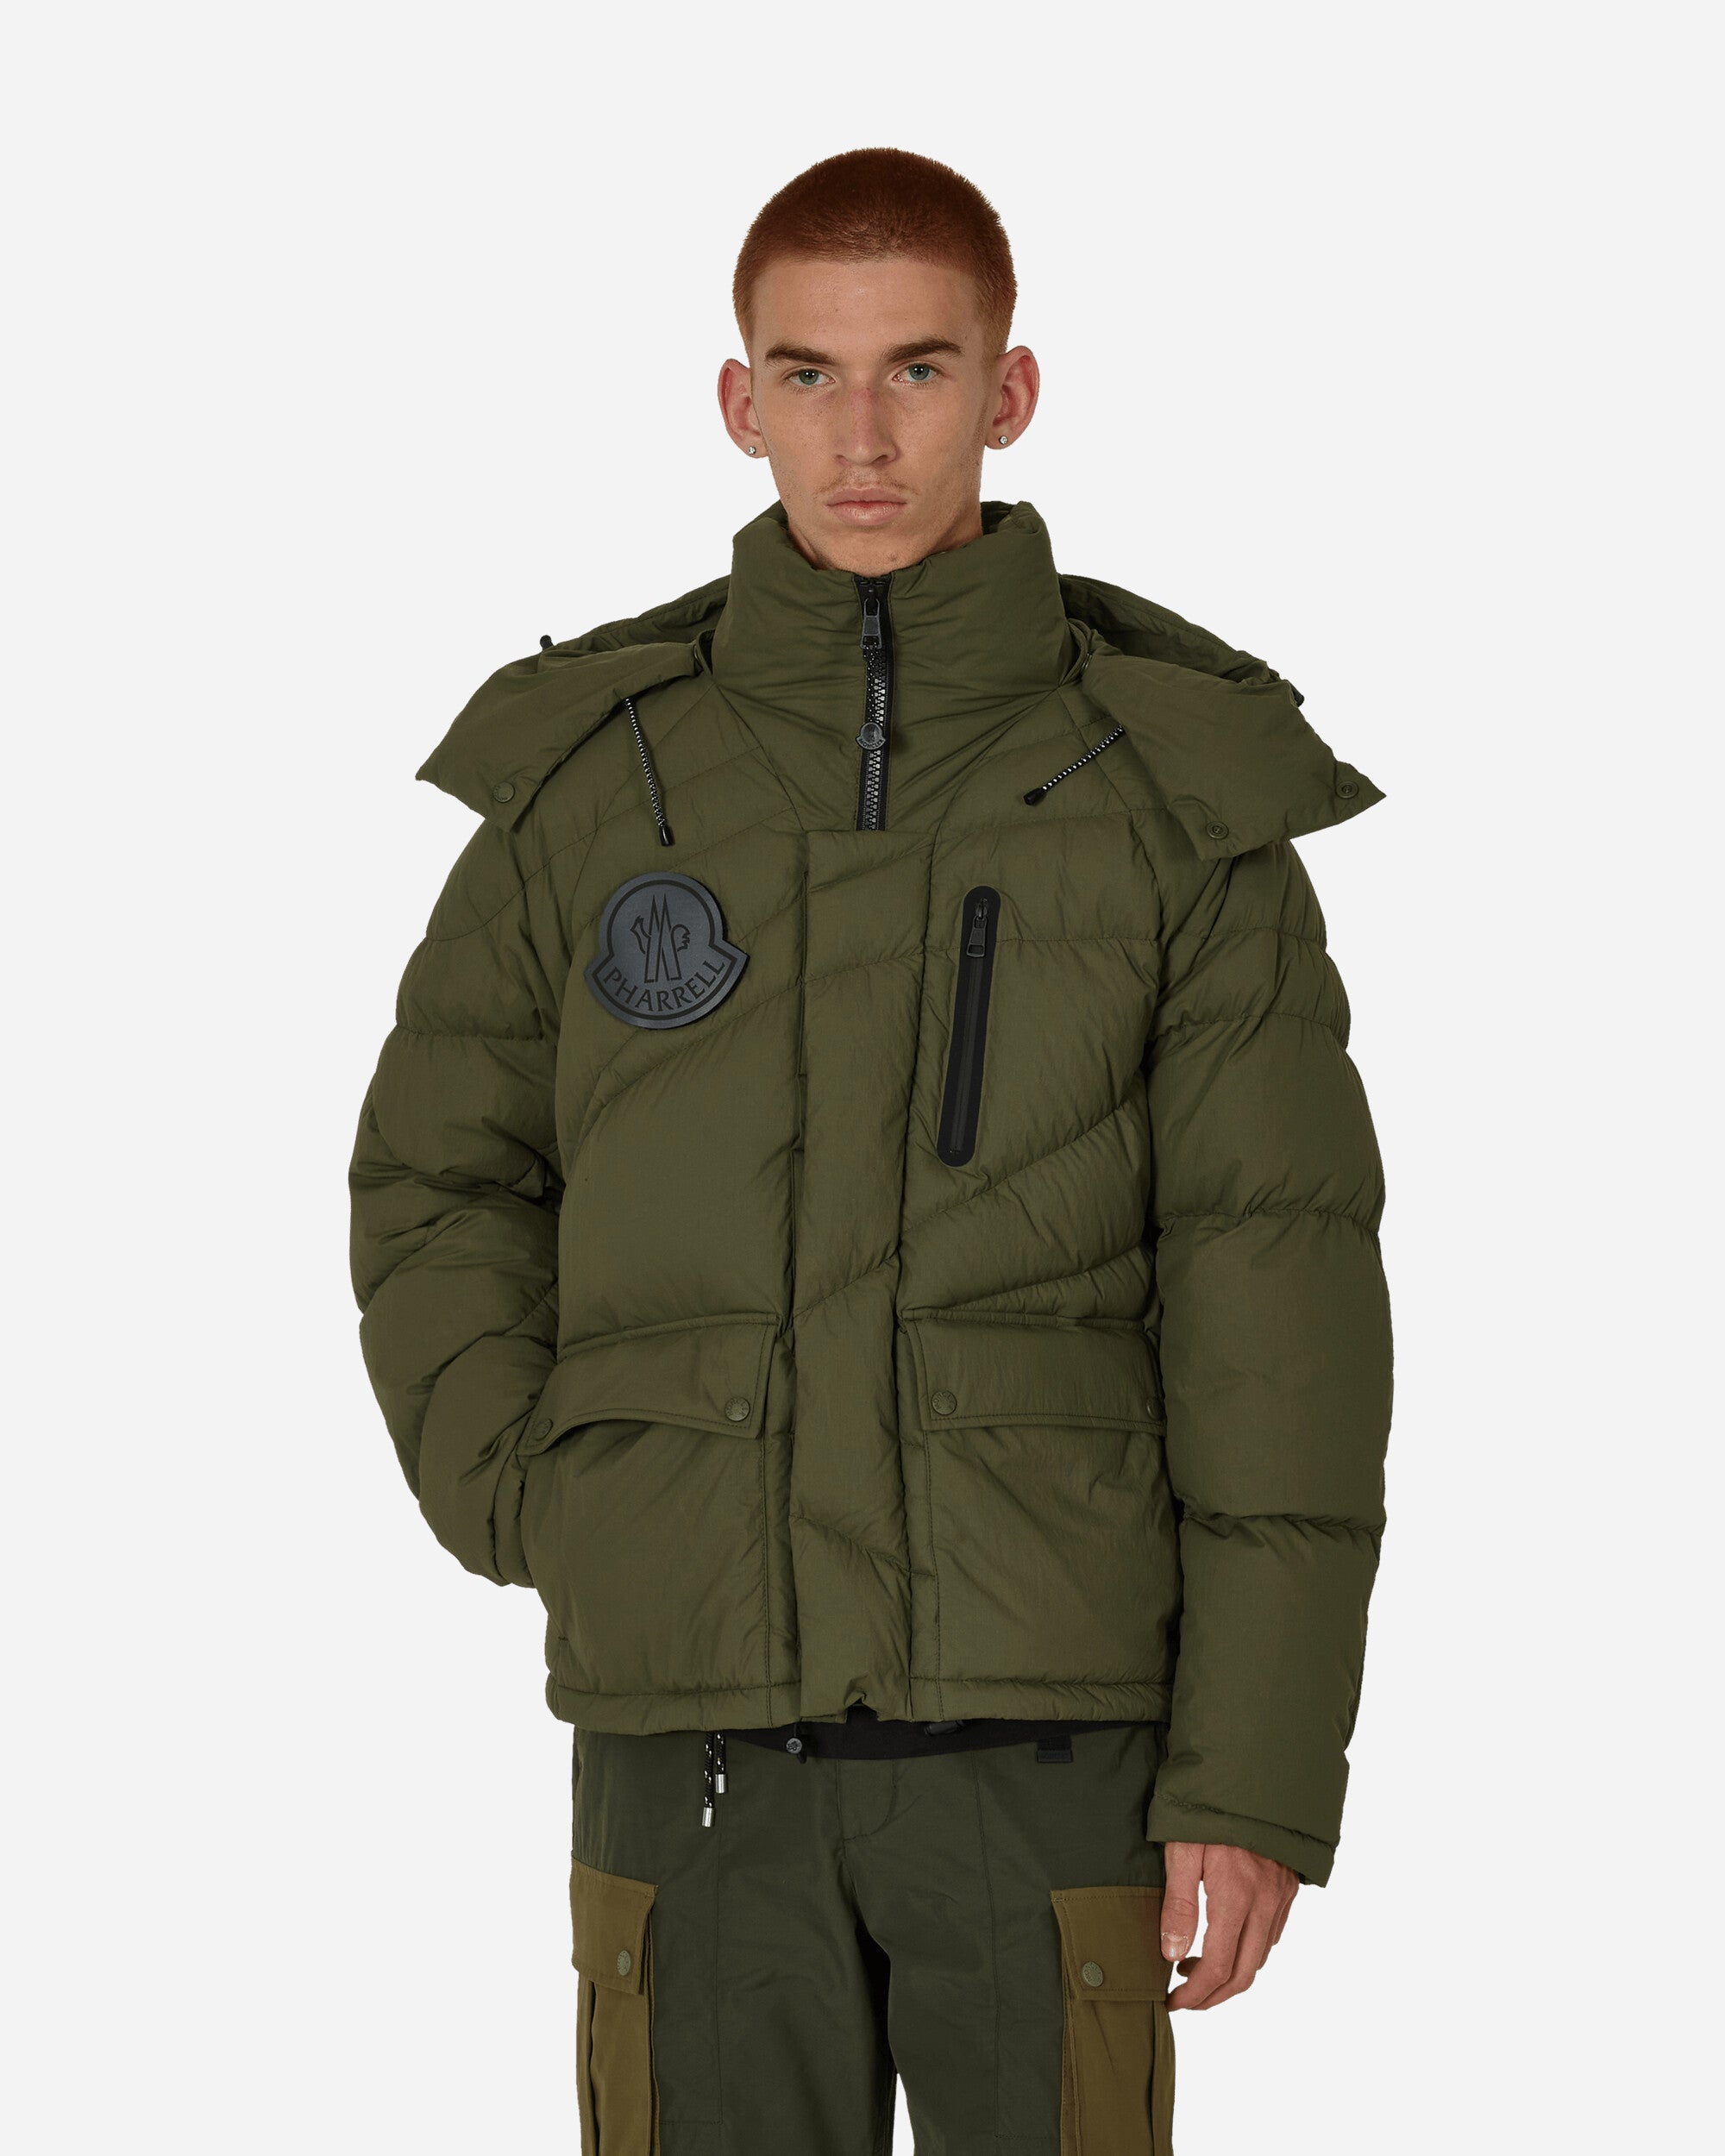 Moncler Genius Chestnut Jacket X Pharell Williams Green Coats and Jackets Down Jackets 1A00001M3404 889